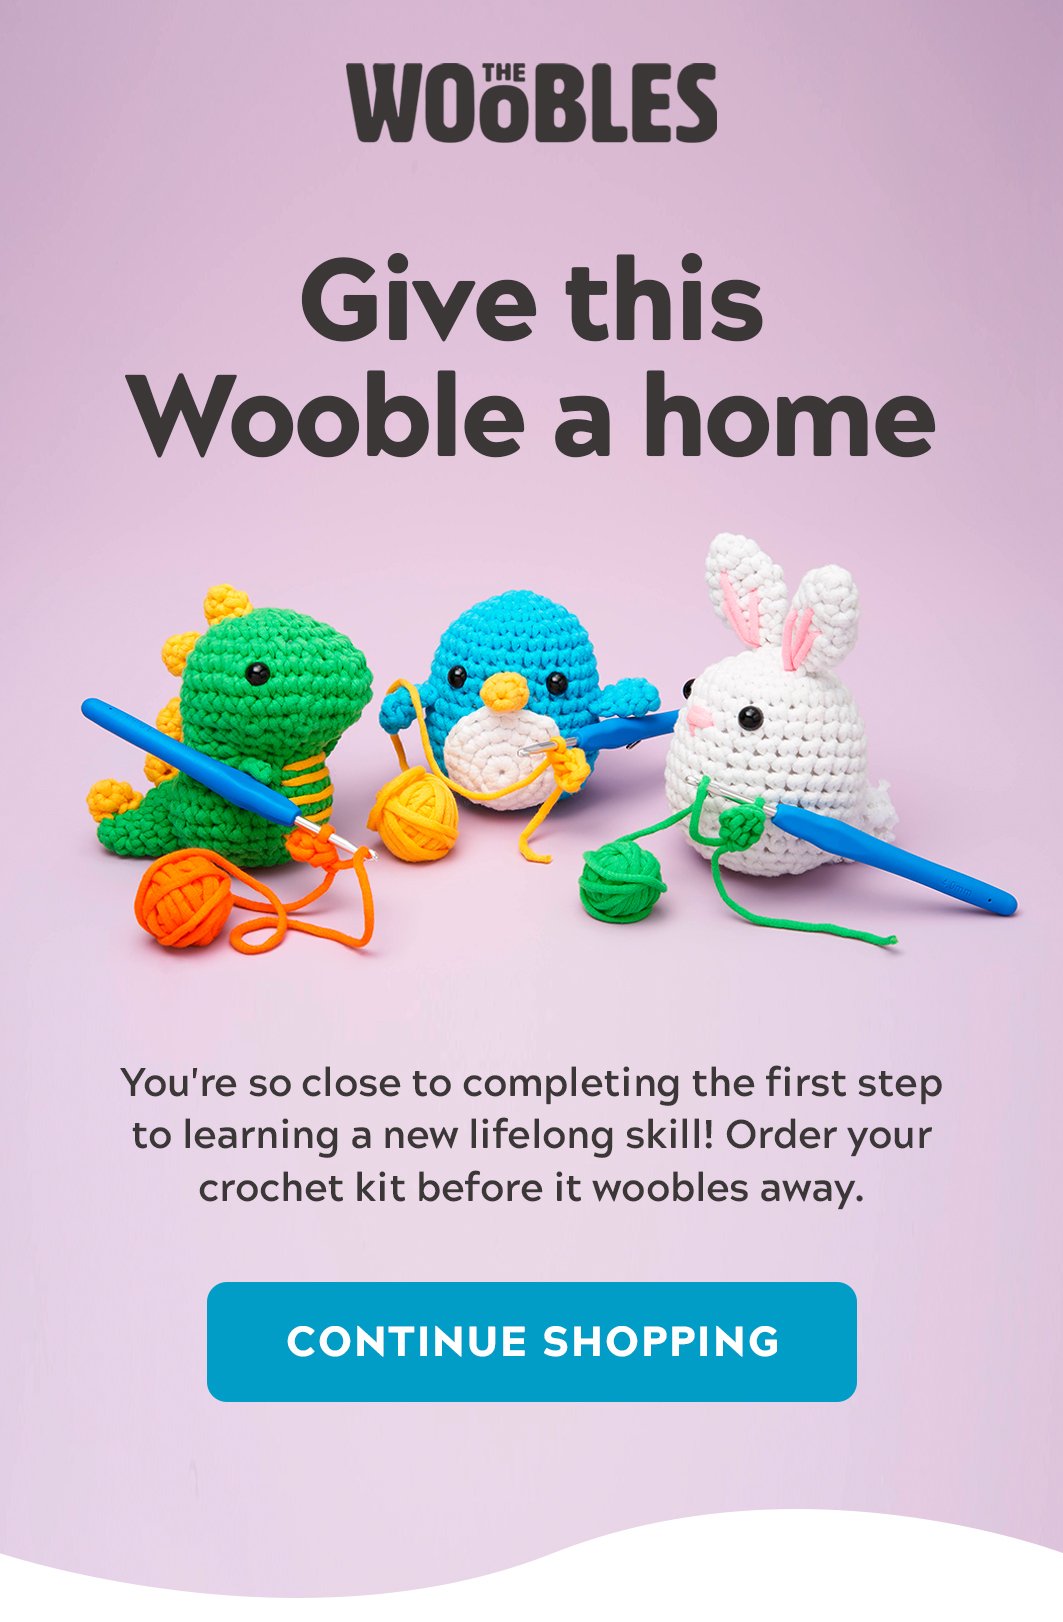 The Woobles: We saw you were eyeing this